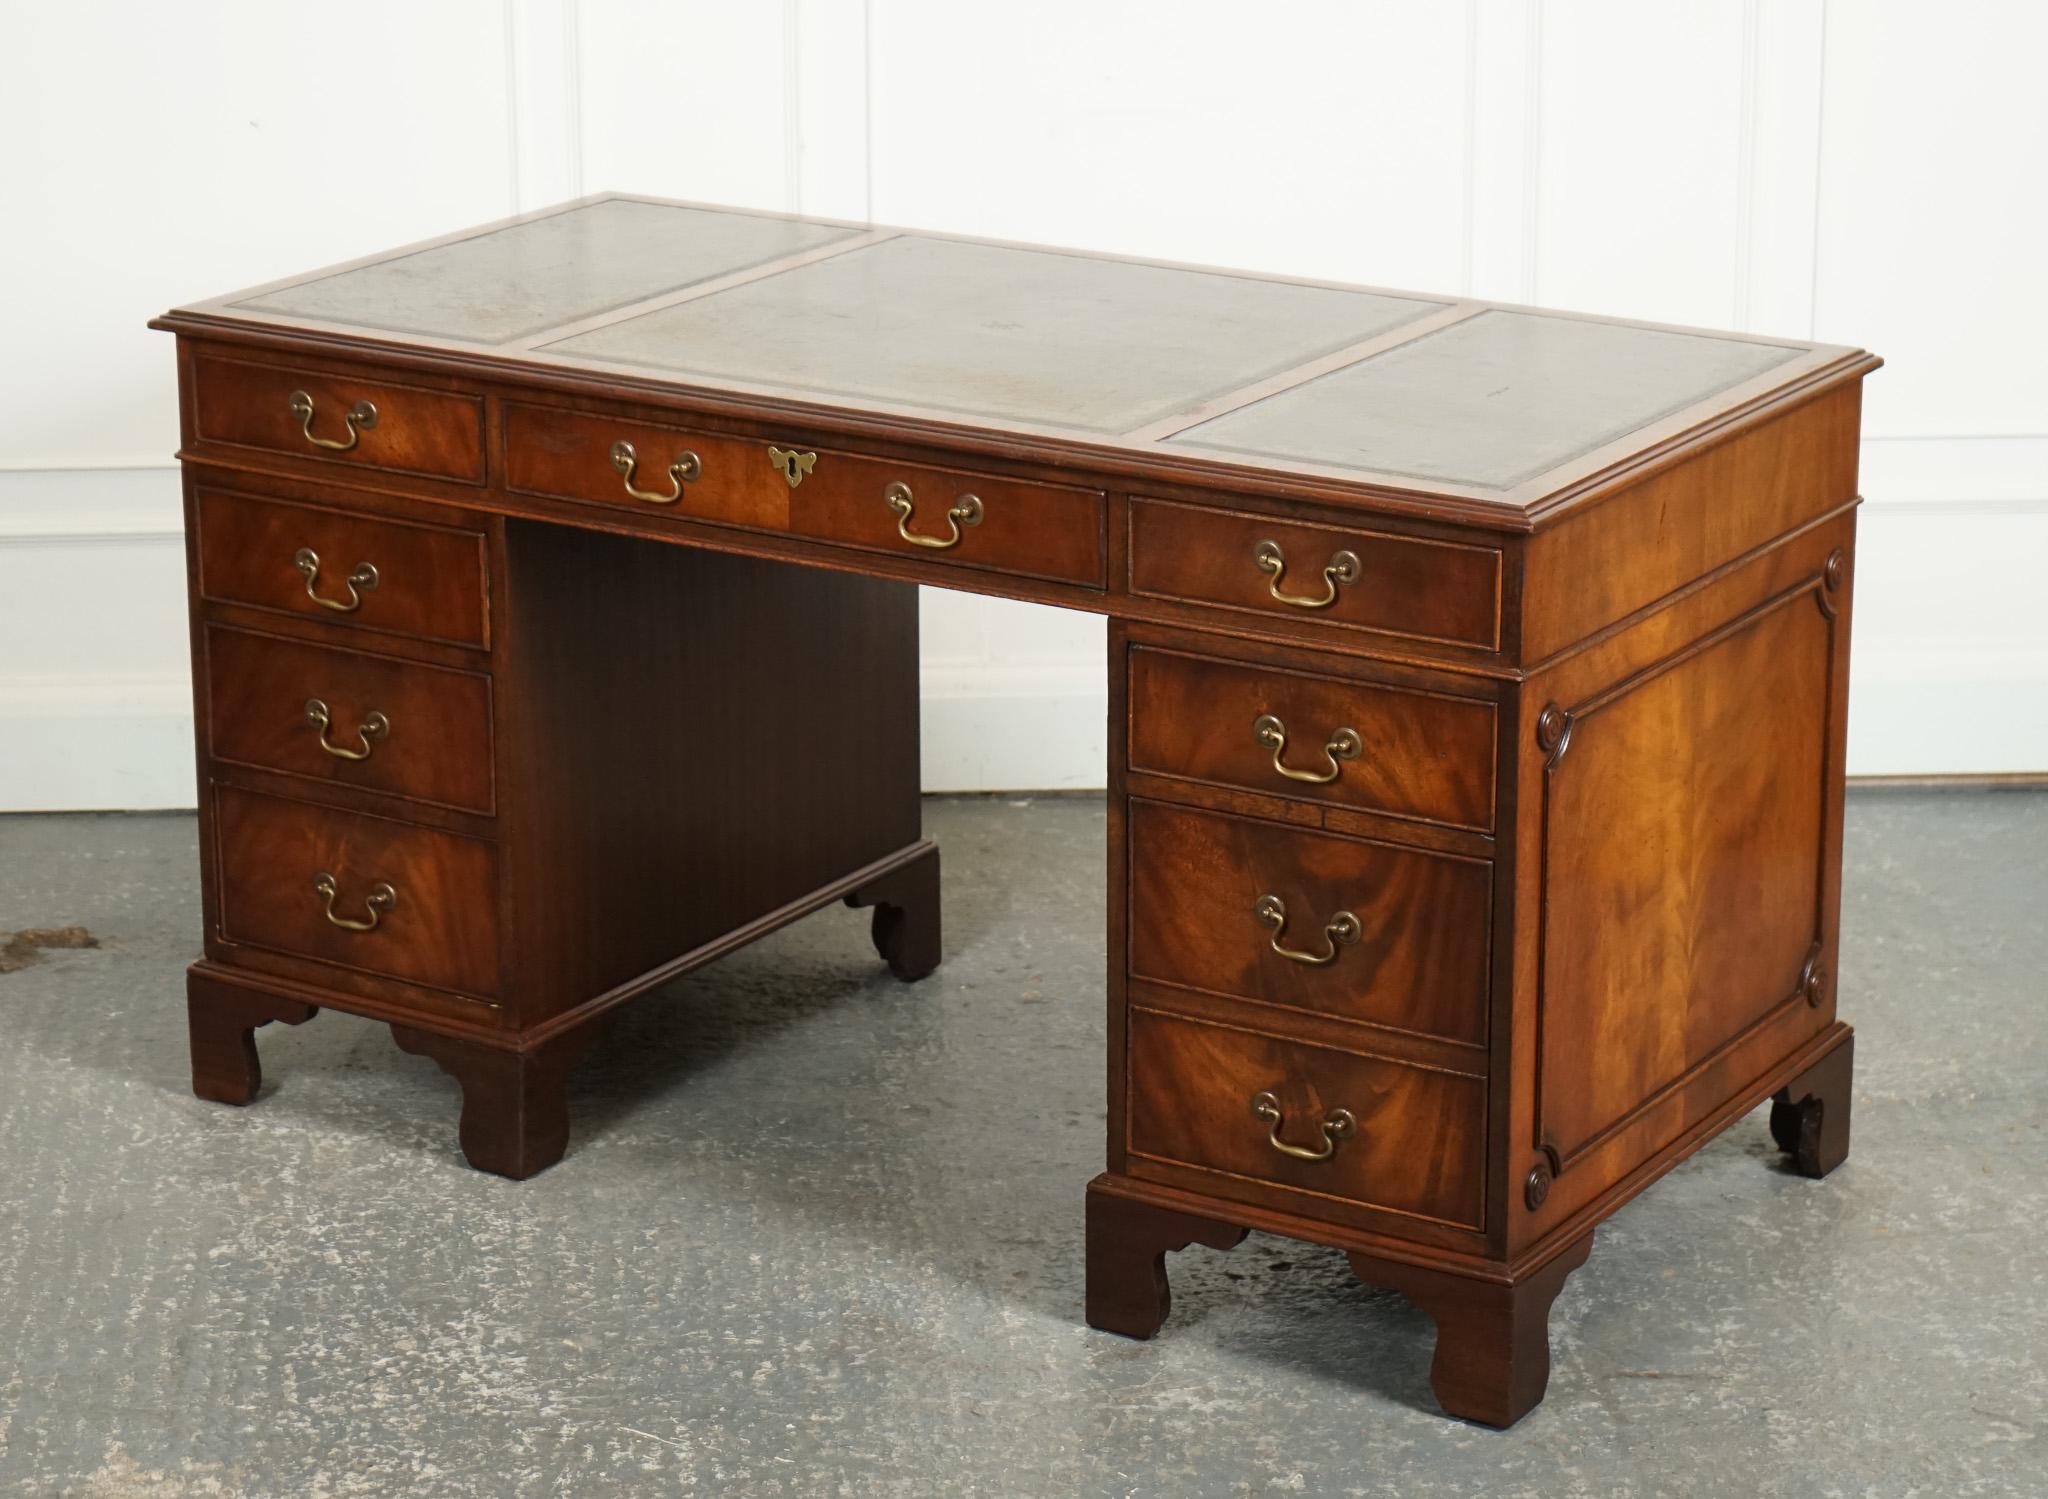 
We are delighted to offer for sale this Bevan Funnell Vintage Pedestal Desk With Hunter Green Leather.

A stunning piece of furniture that exudes elegance and sophistication. This desk typically features a classic design with exquisite